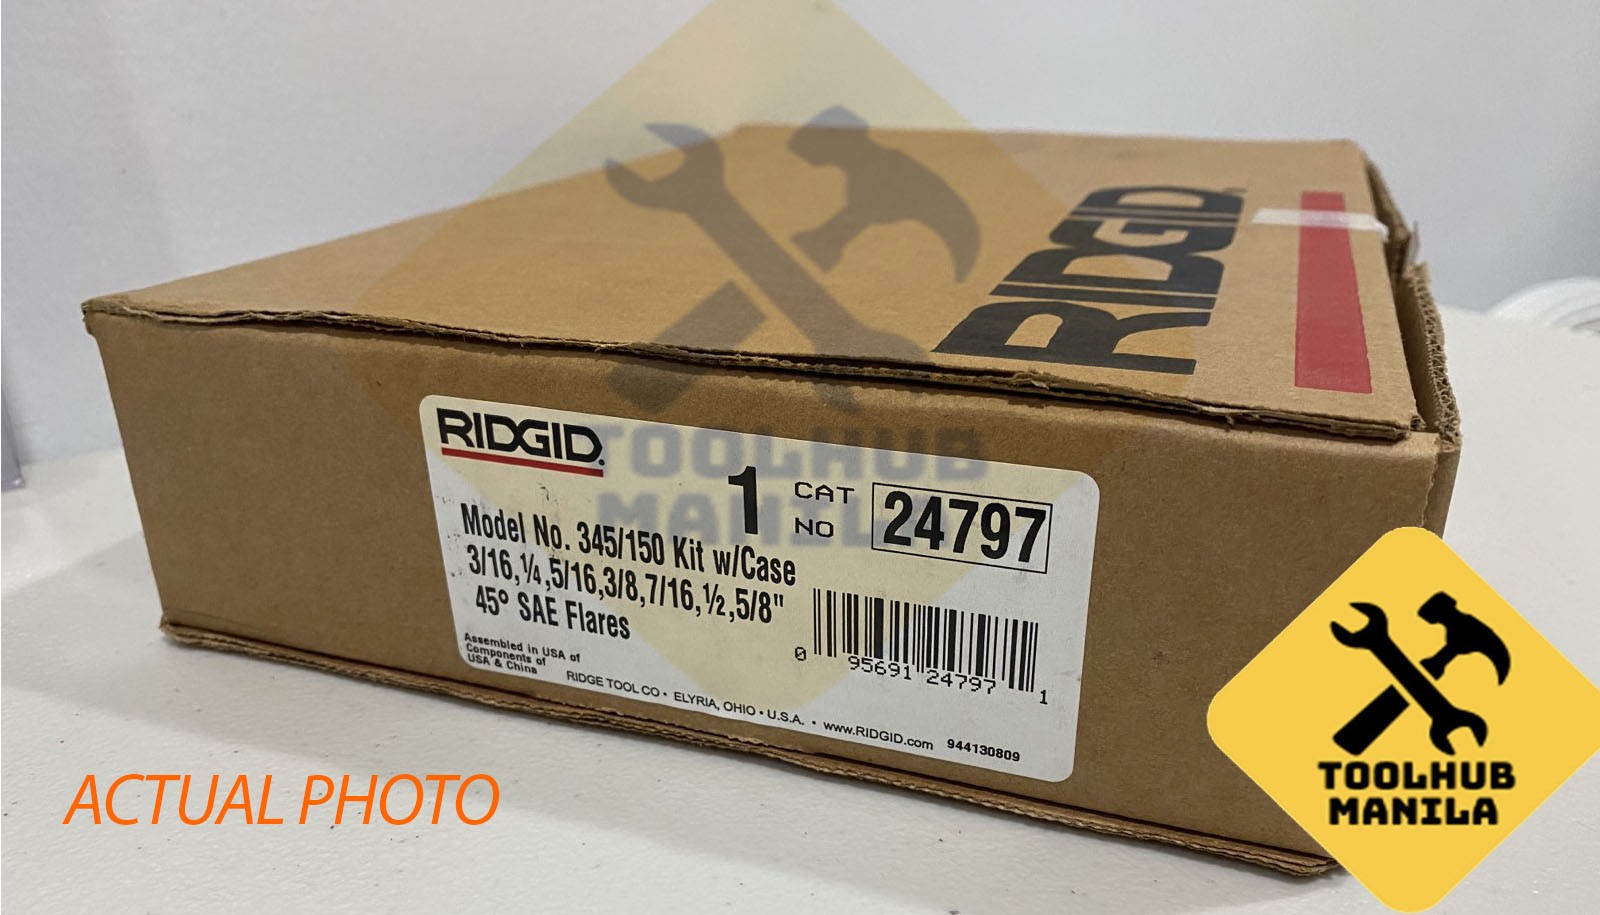 RIDGID Model 345/150 Flaring Tool Kit with #150 Tubing Cutter With